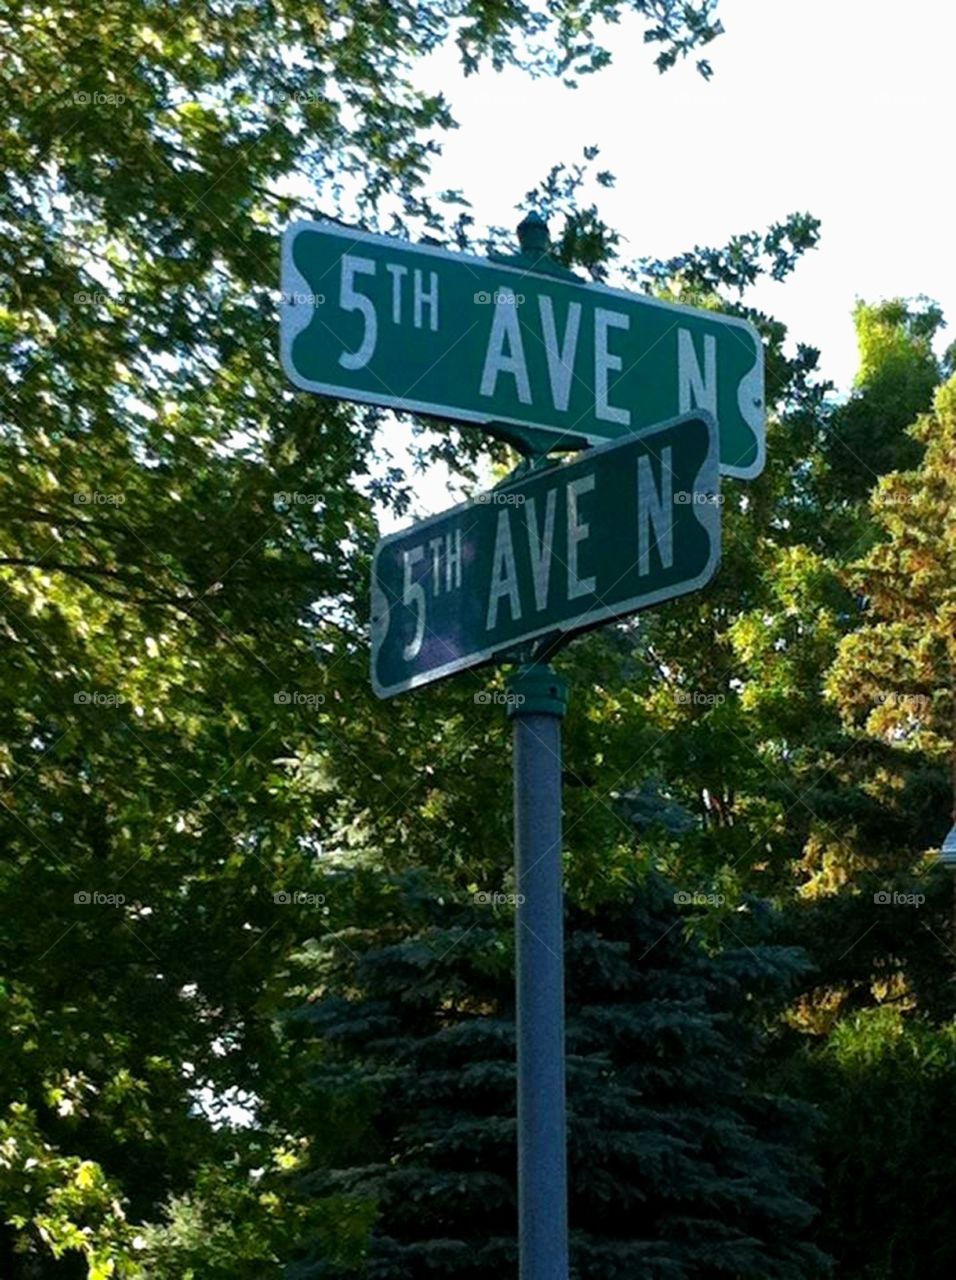 Where the streets have the same name